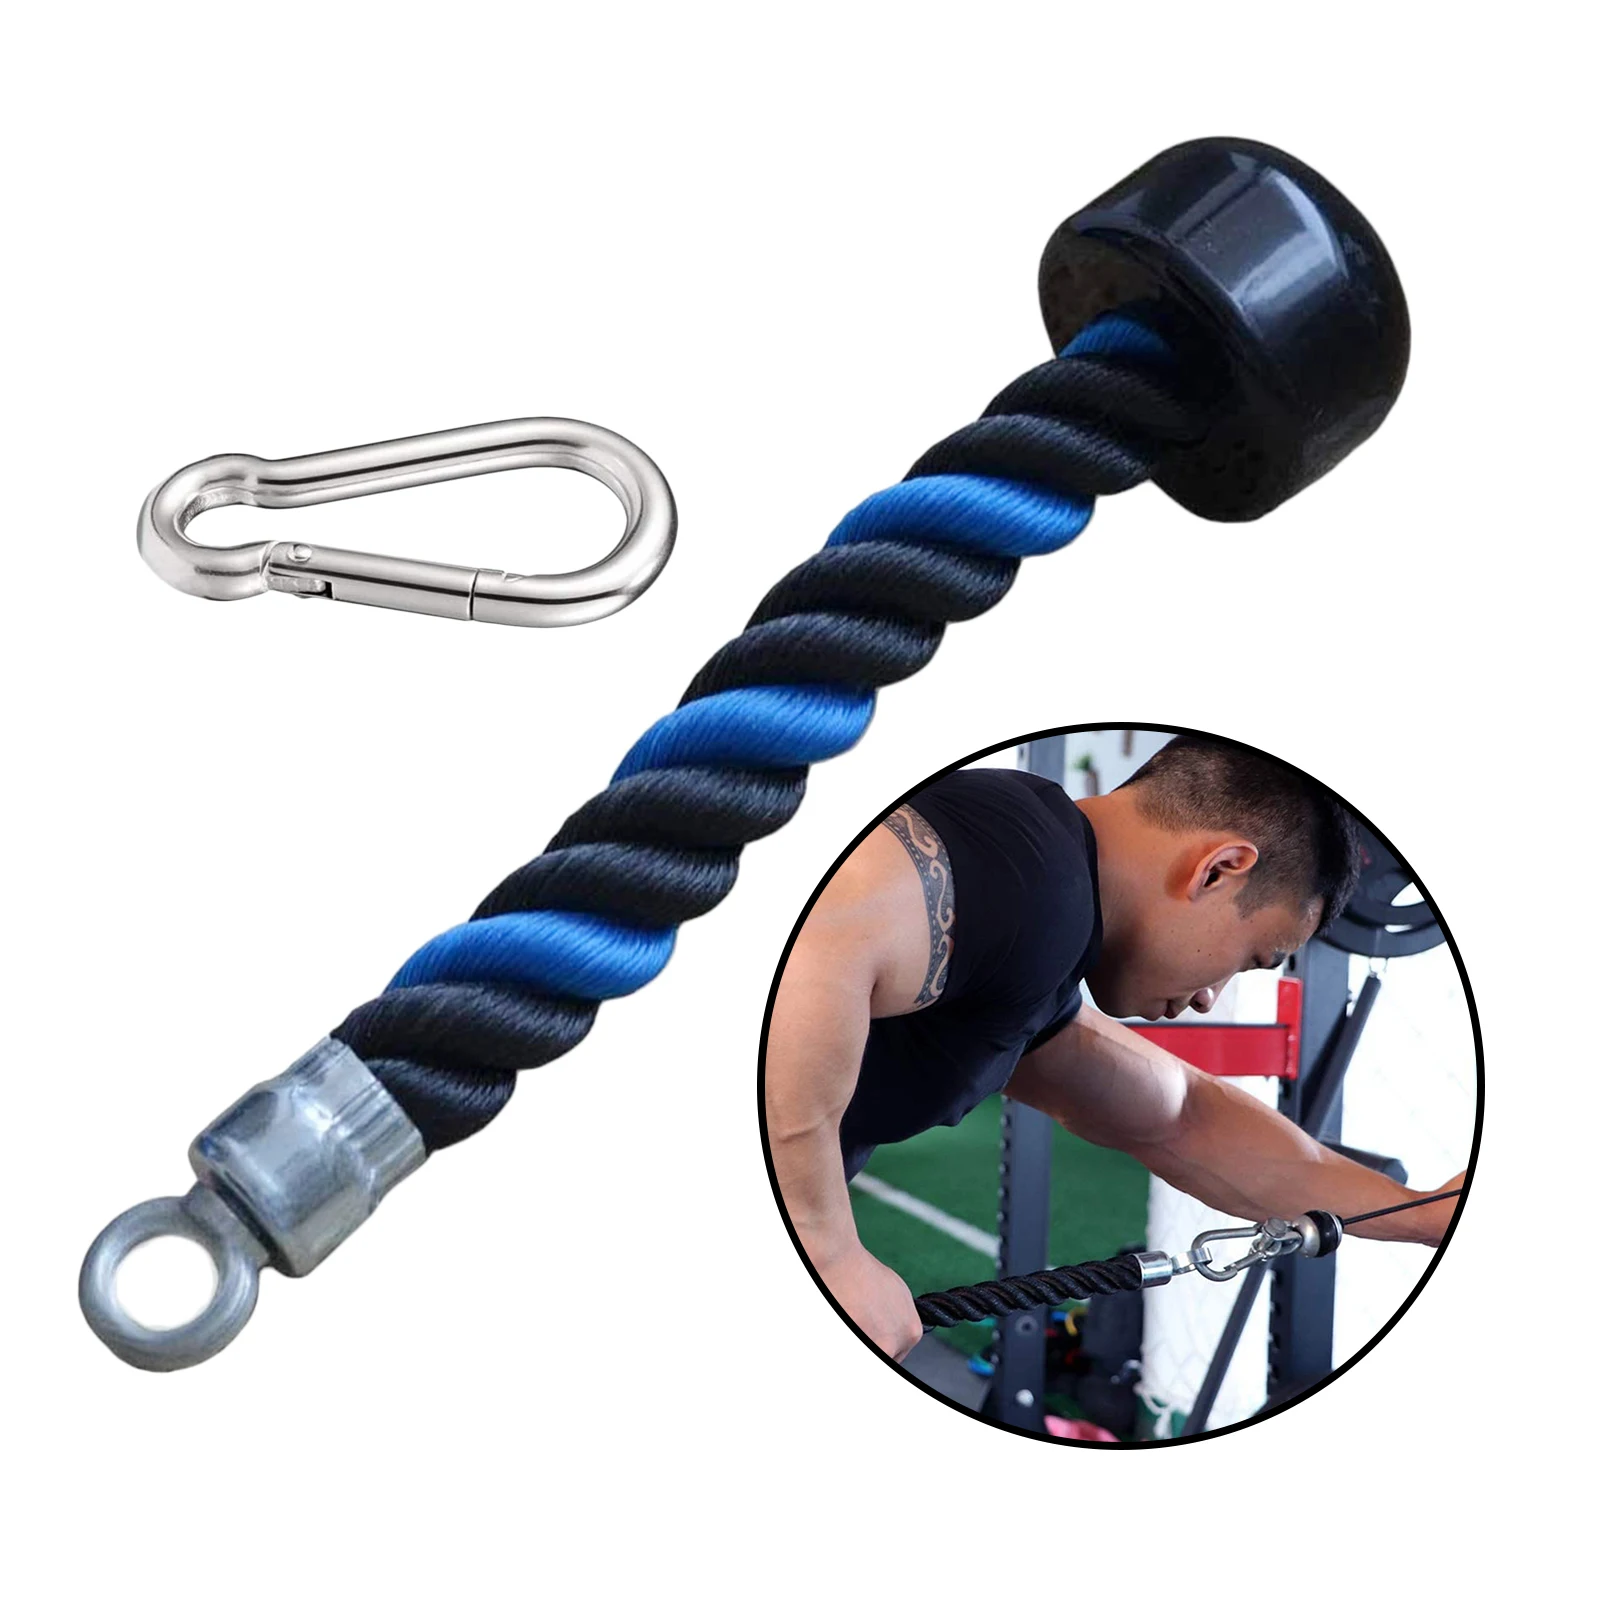 Triceps Single Rope LAT Pull Down Handle Cable Machine Multi-Gym Attachment with Carabiner for Arm Bicep Muscle Building